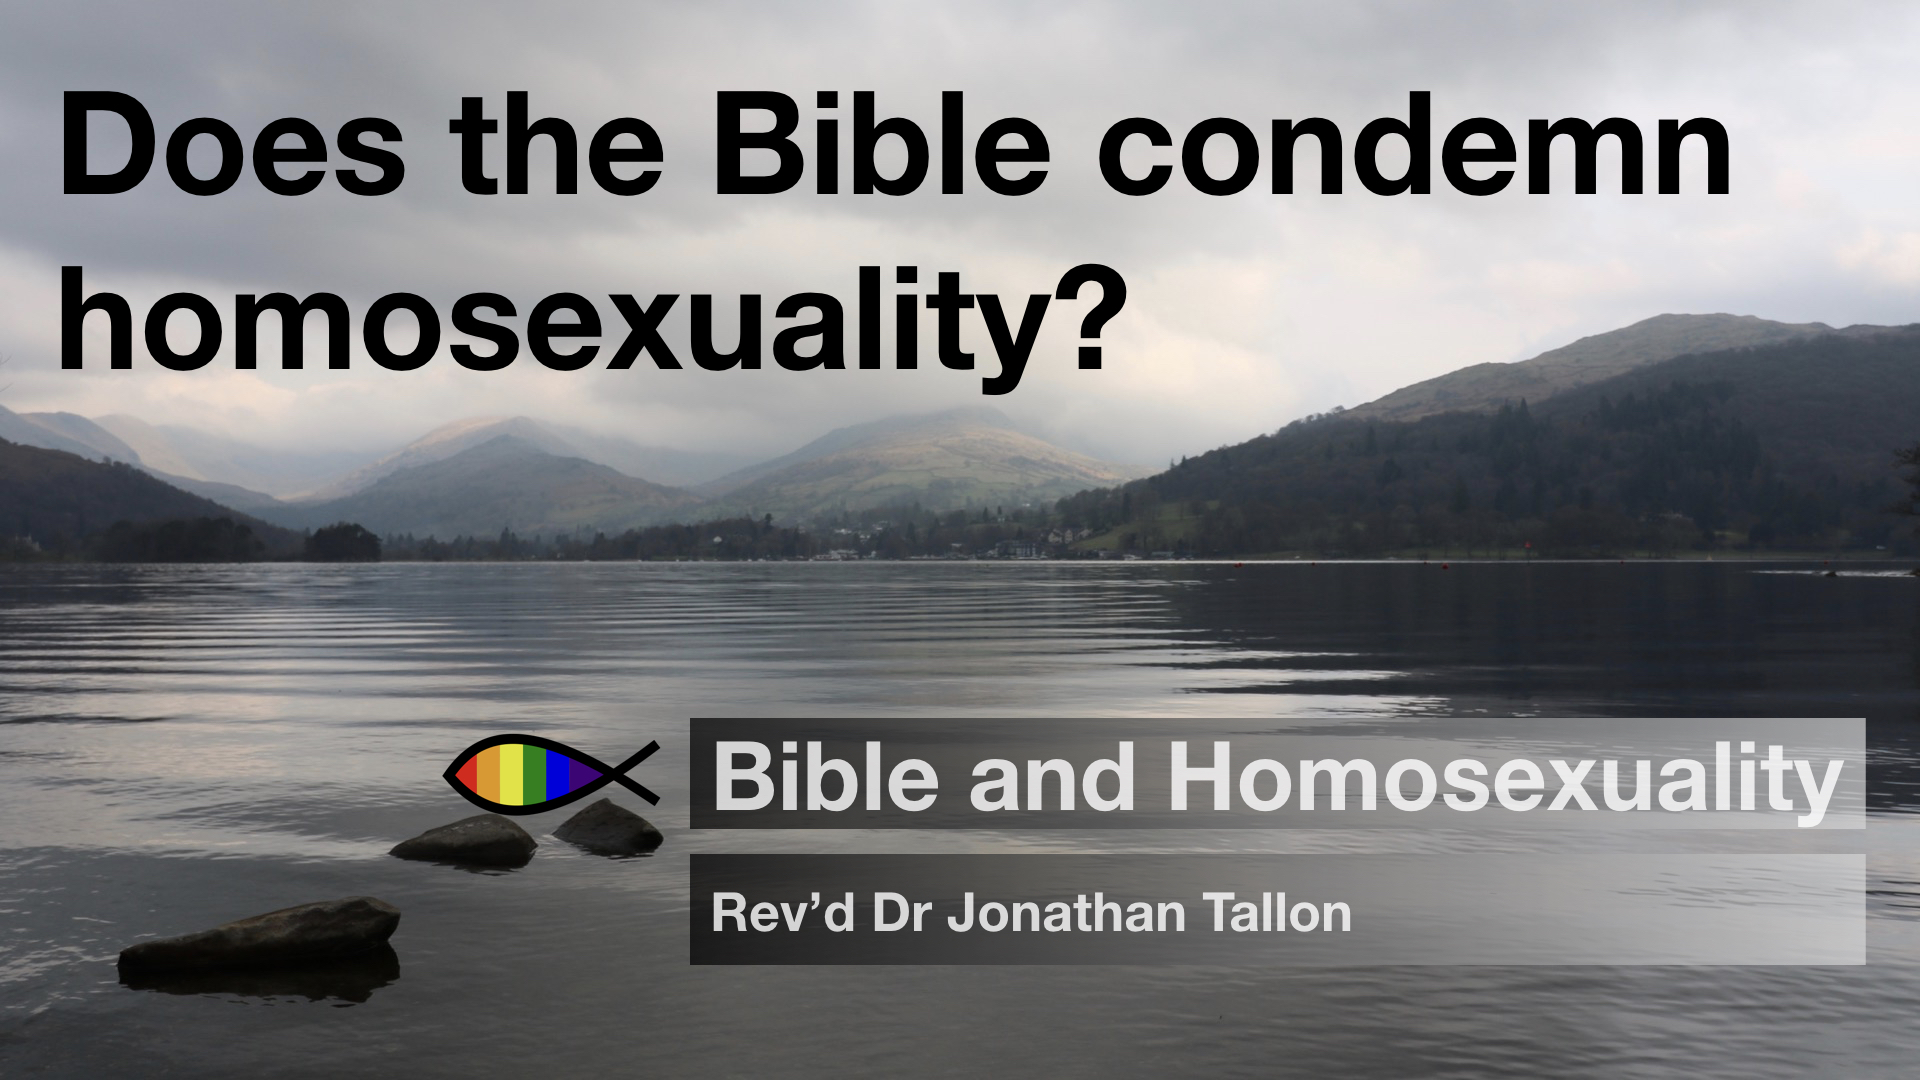 Does the bible speak against homosexual